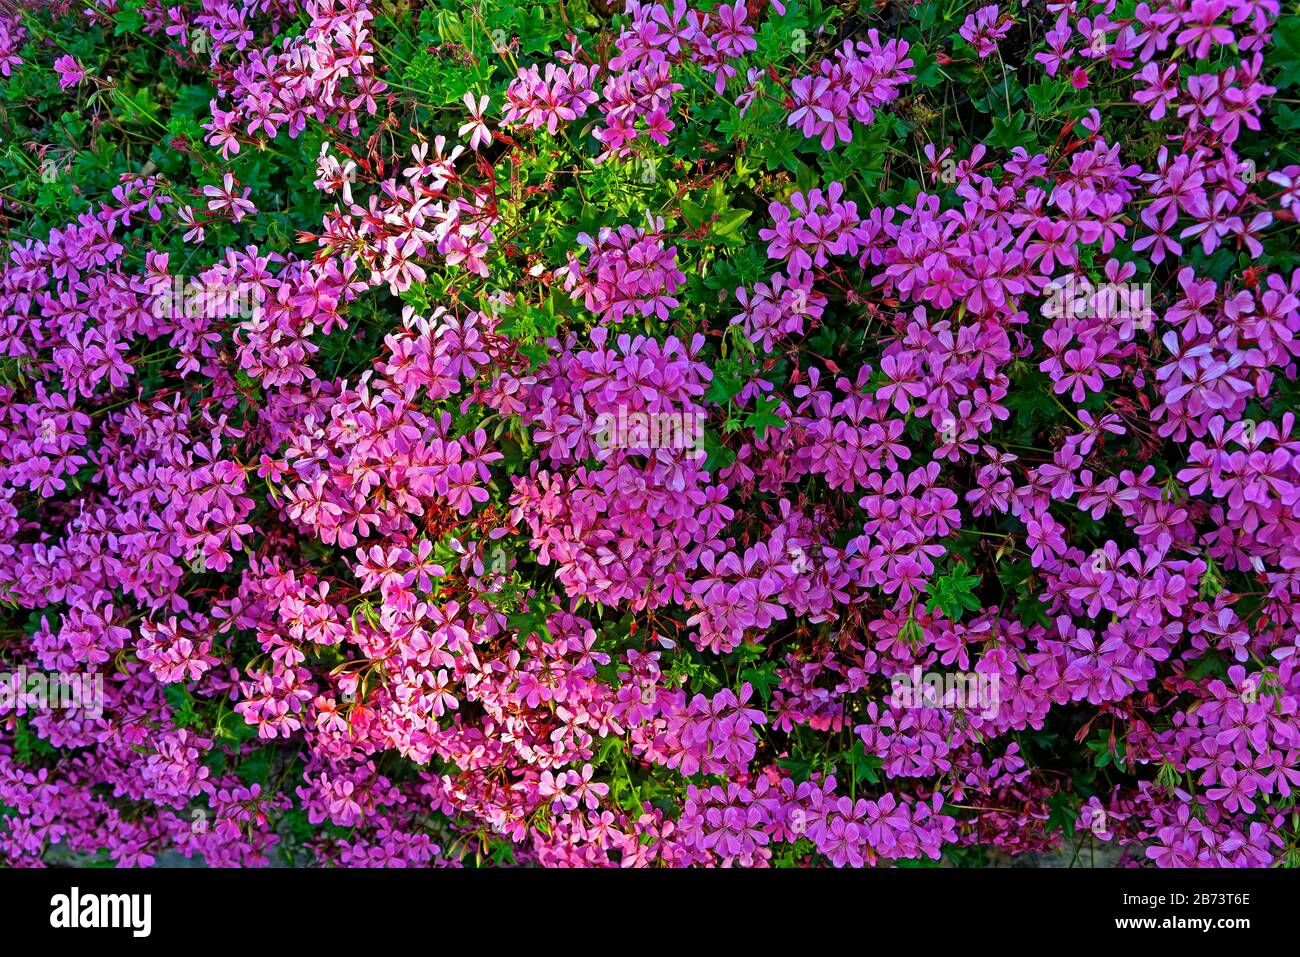 Germany, Baden-Wurttemberg, Bruchsal, Otto Oppenheimer place, flowers, blossoms, geraniums, mauve, plants, flowers, detail, pattern Stock Photo